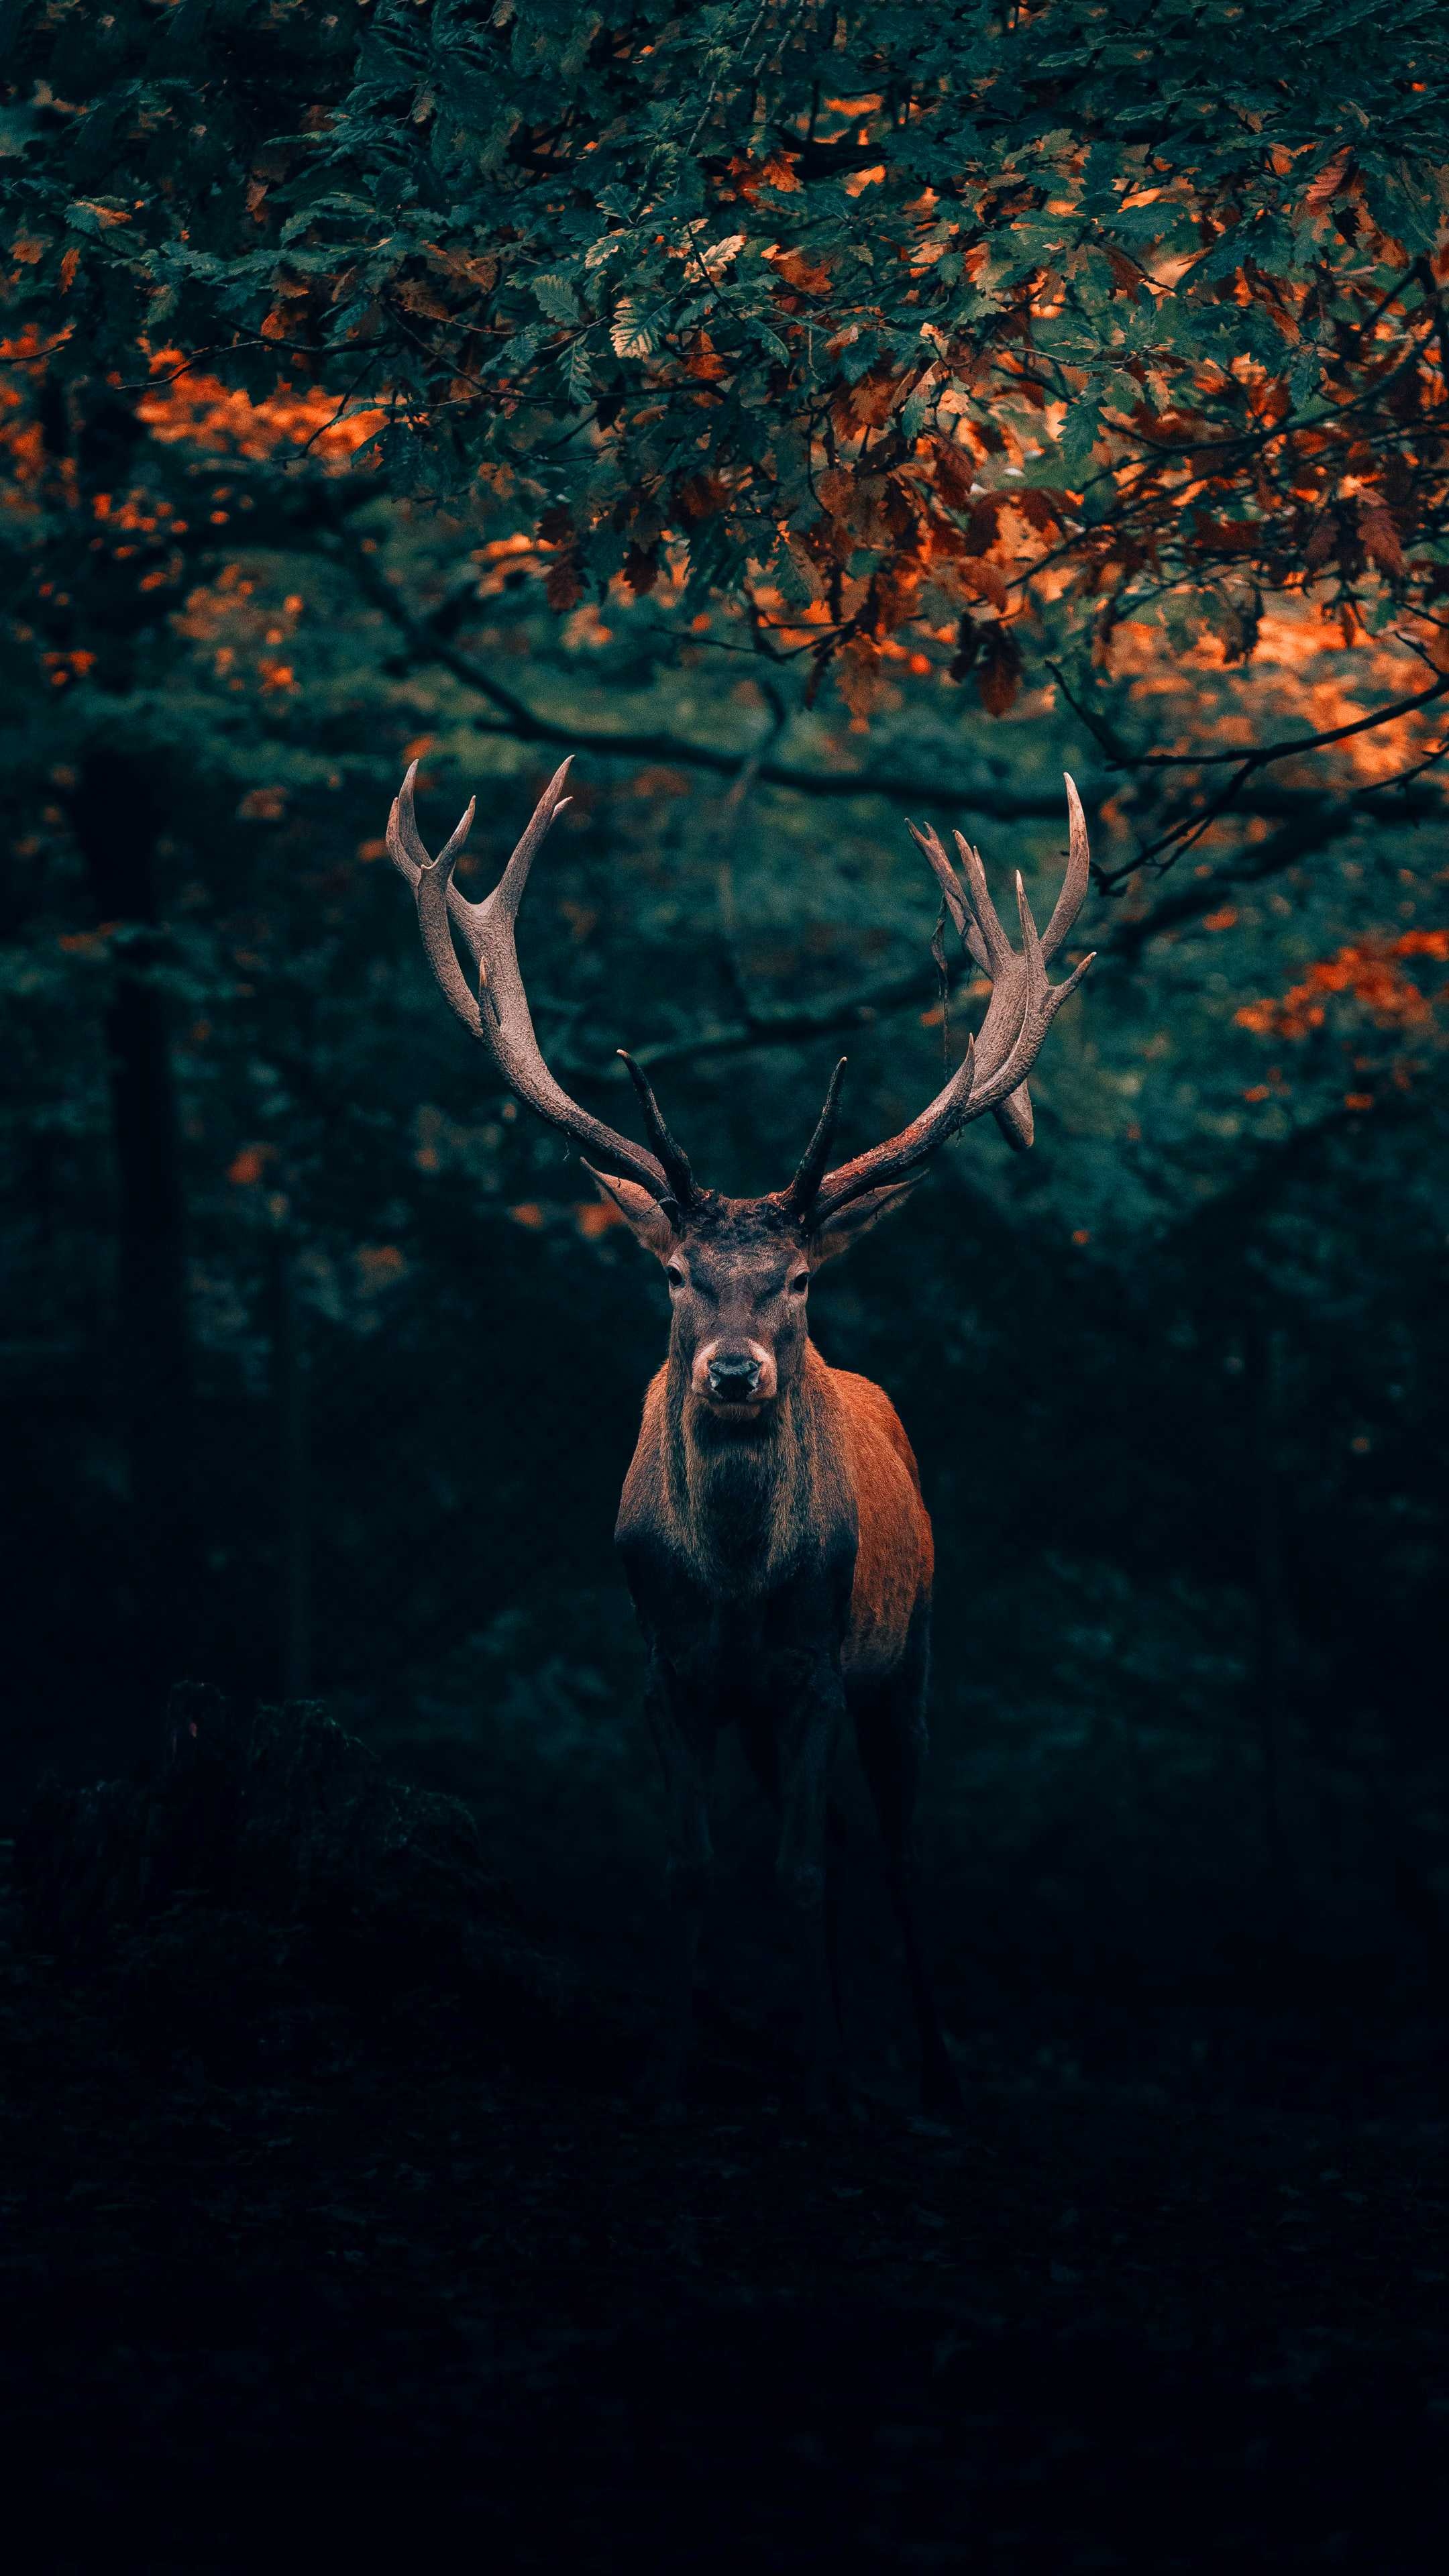 Majestic deer, Artistic wallpapers, Natural elegance, Photography masterpieces, 2160x3840 4K Phone